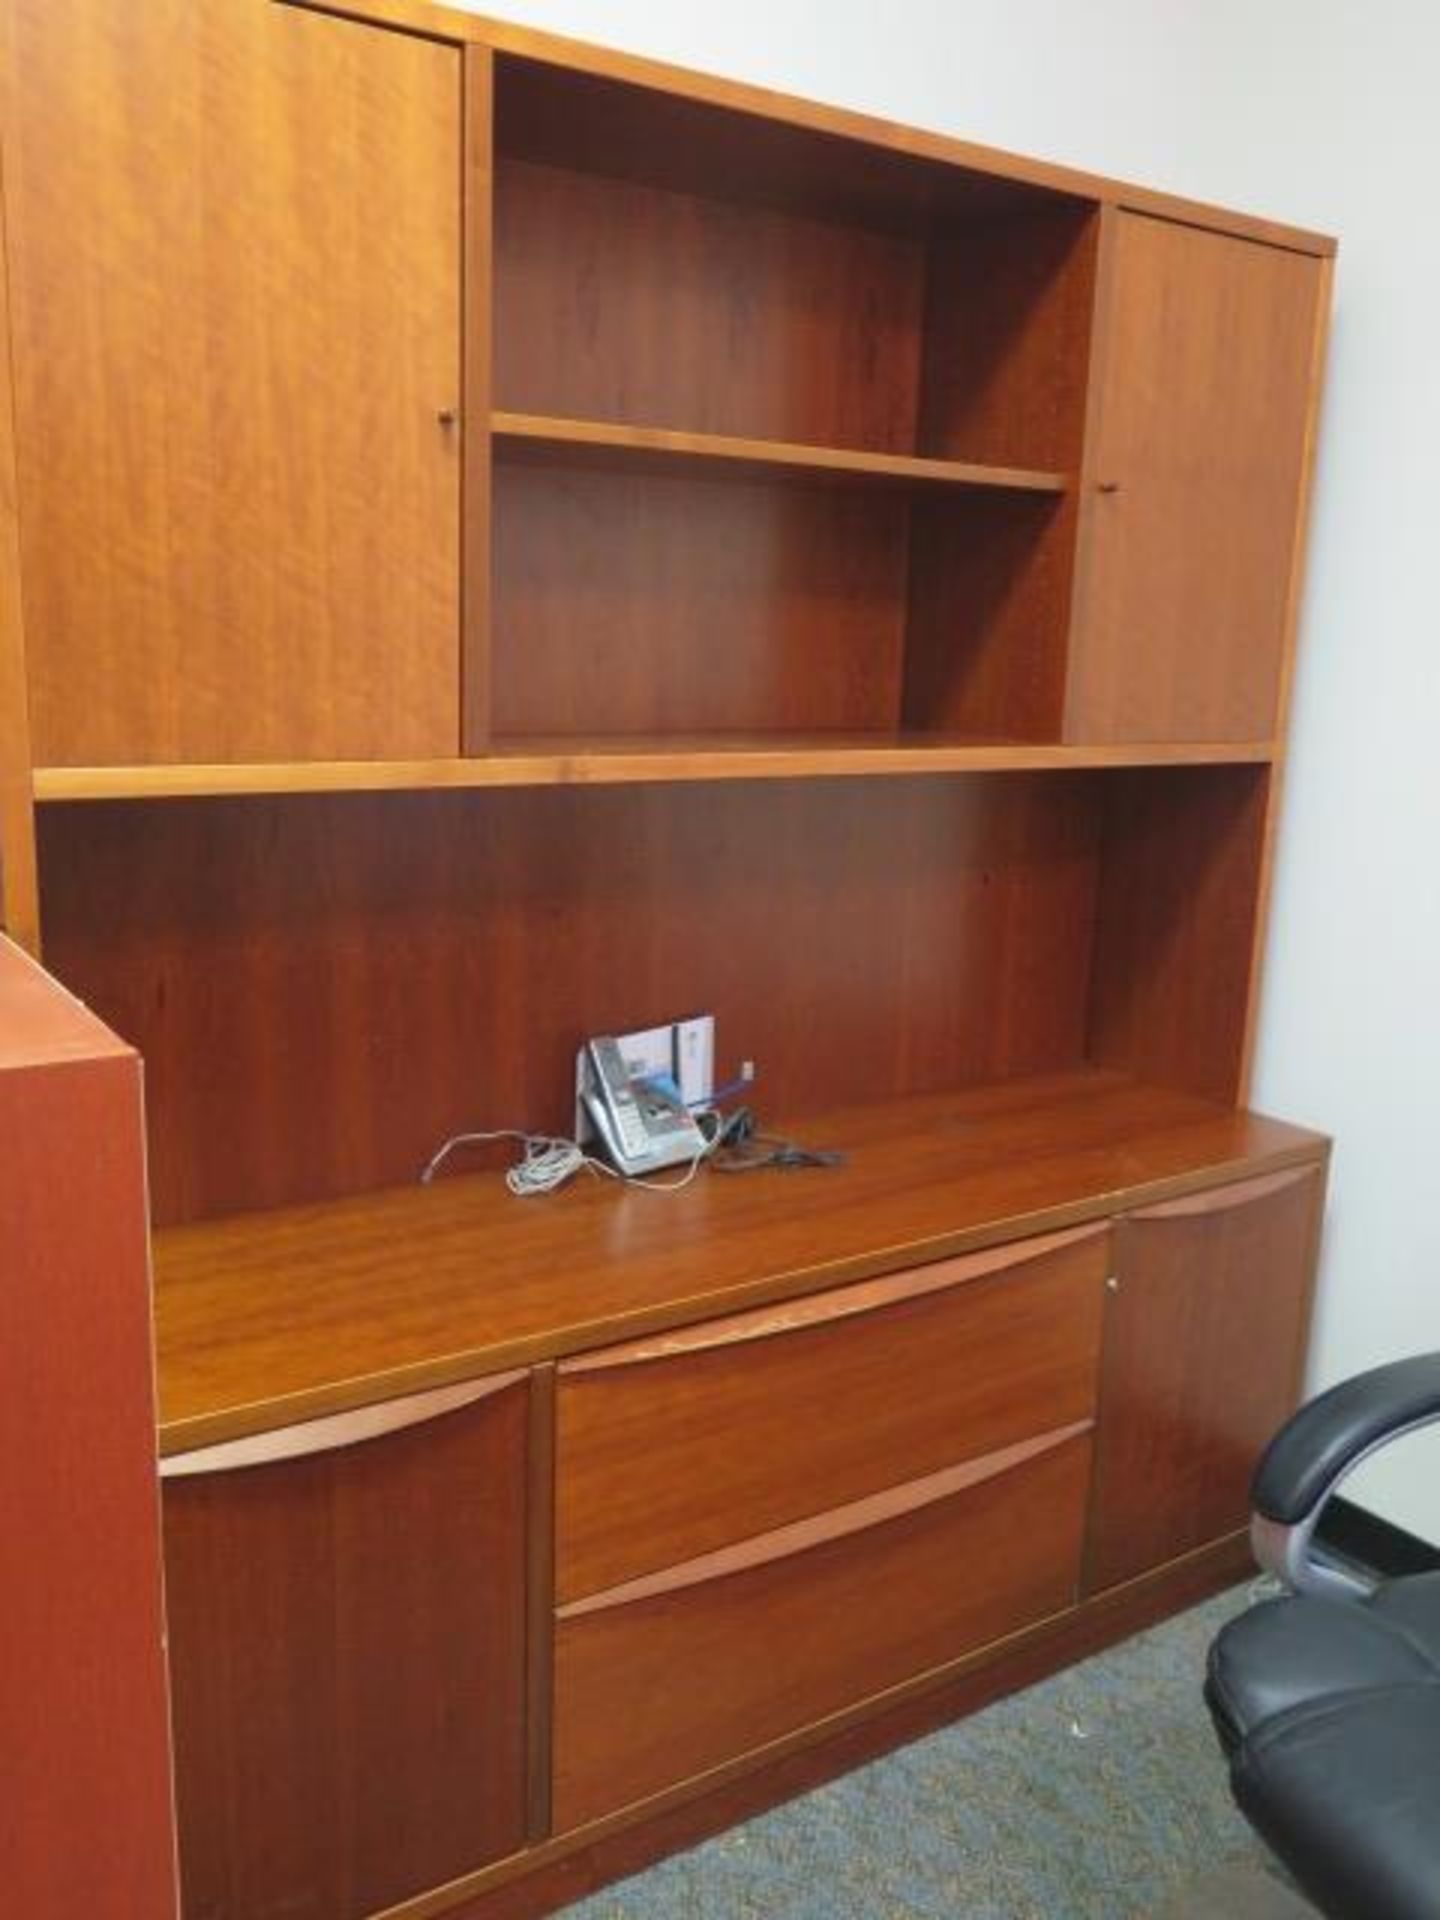 Desk, Credenza, Bookshelf and Chairs (SOLD AS-IS - NO WARRANTY) - Image 4 of 7